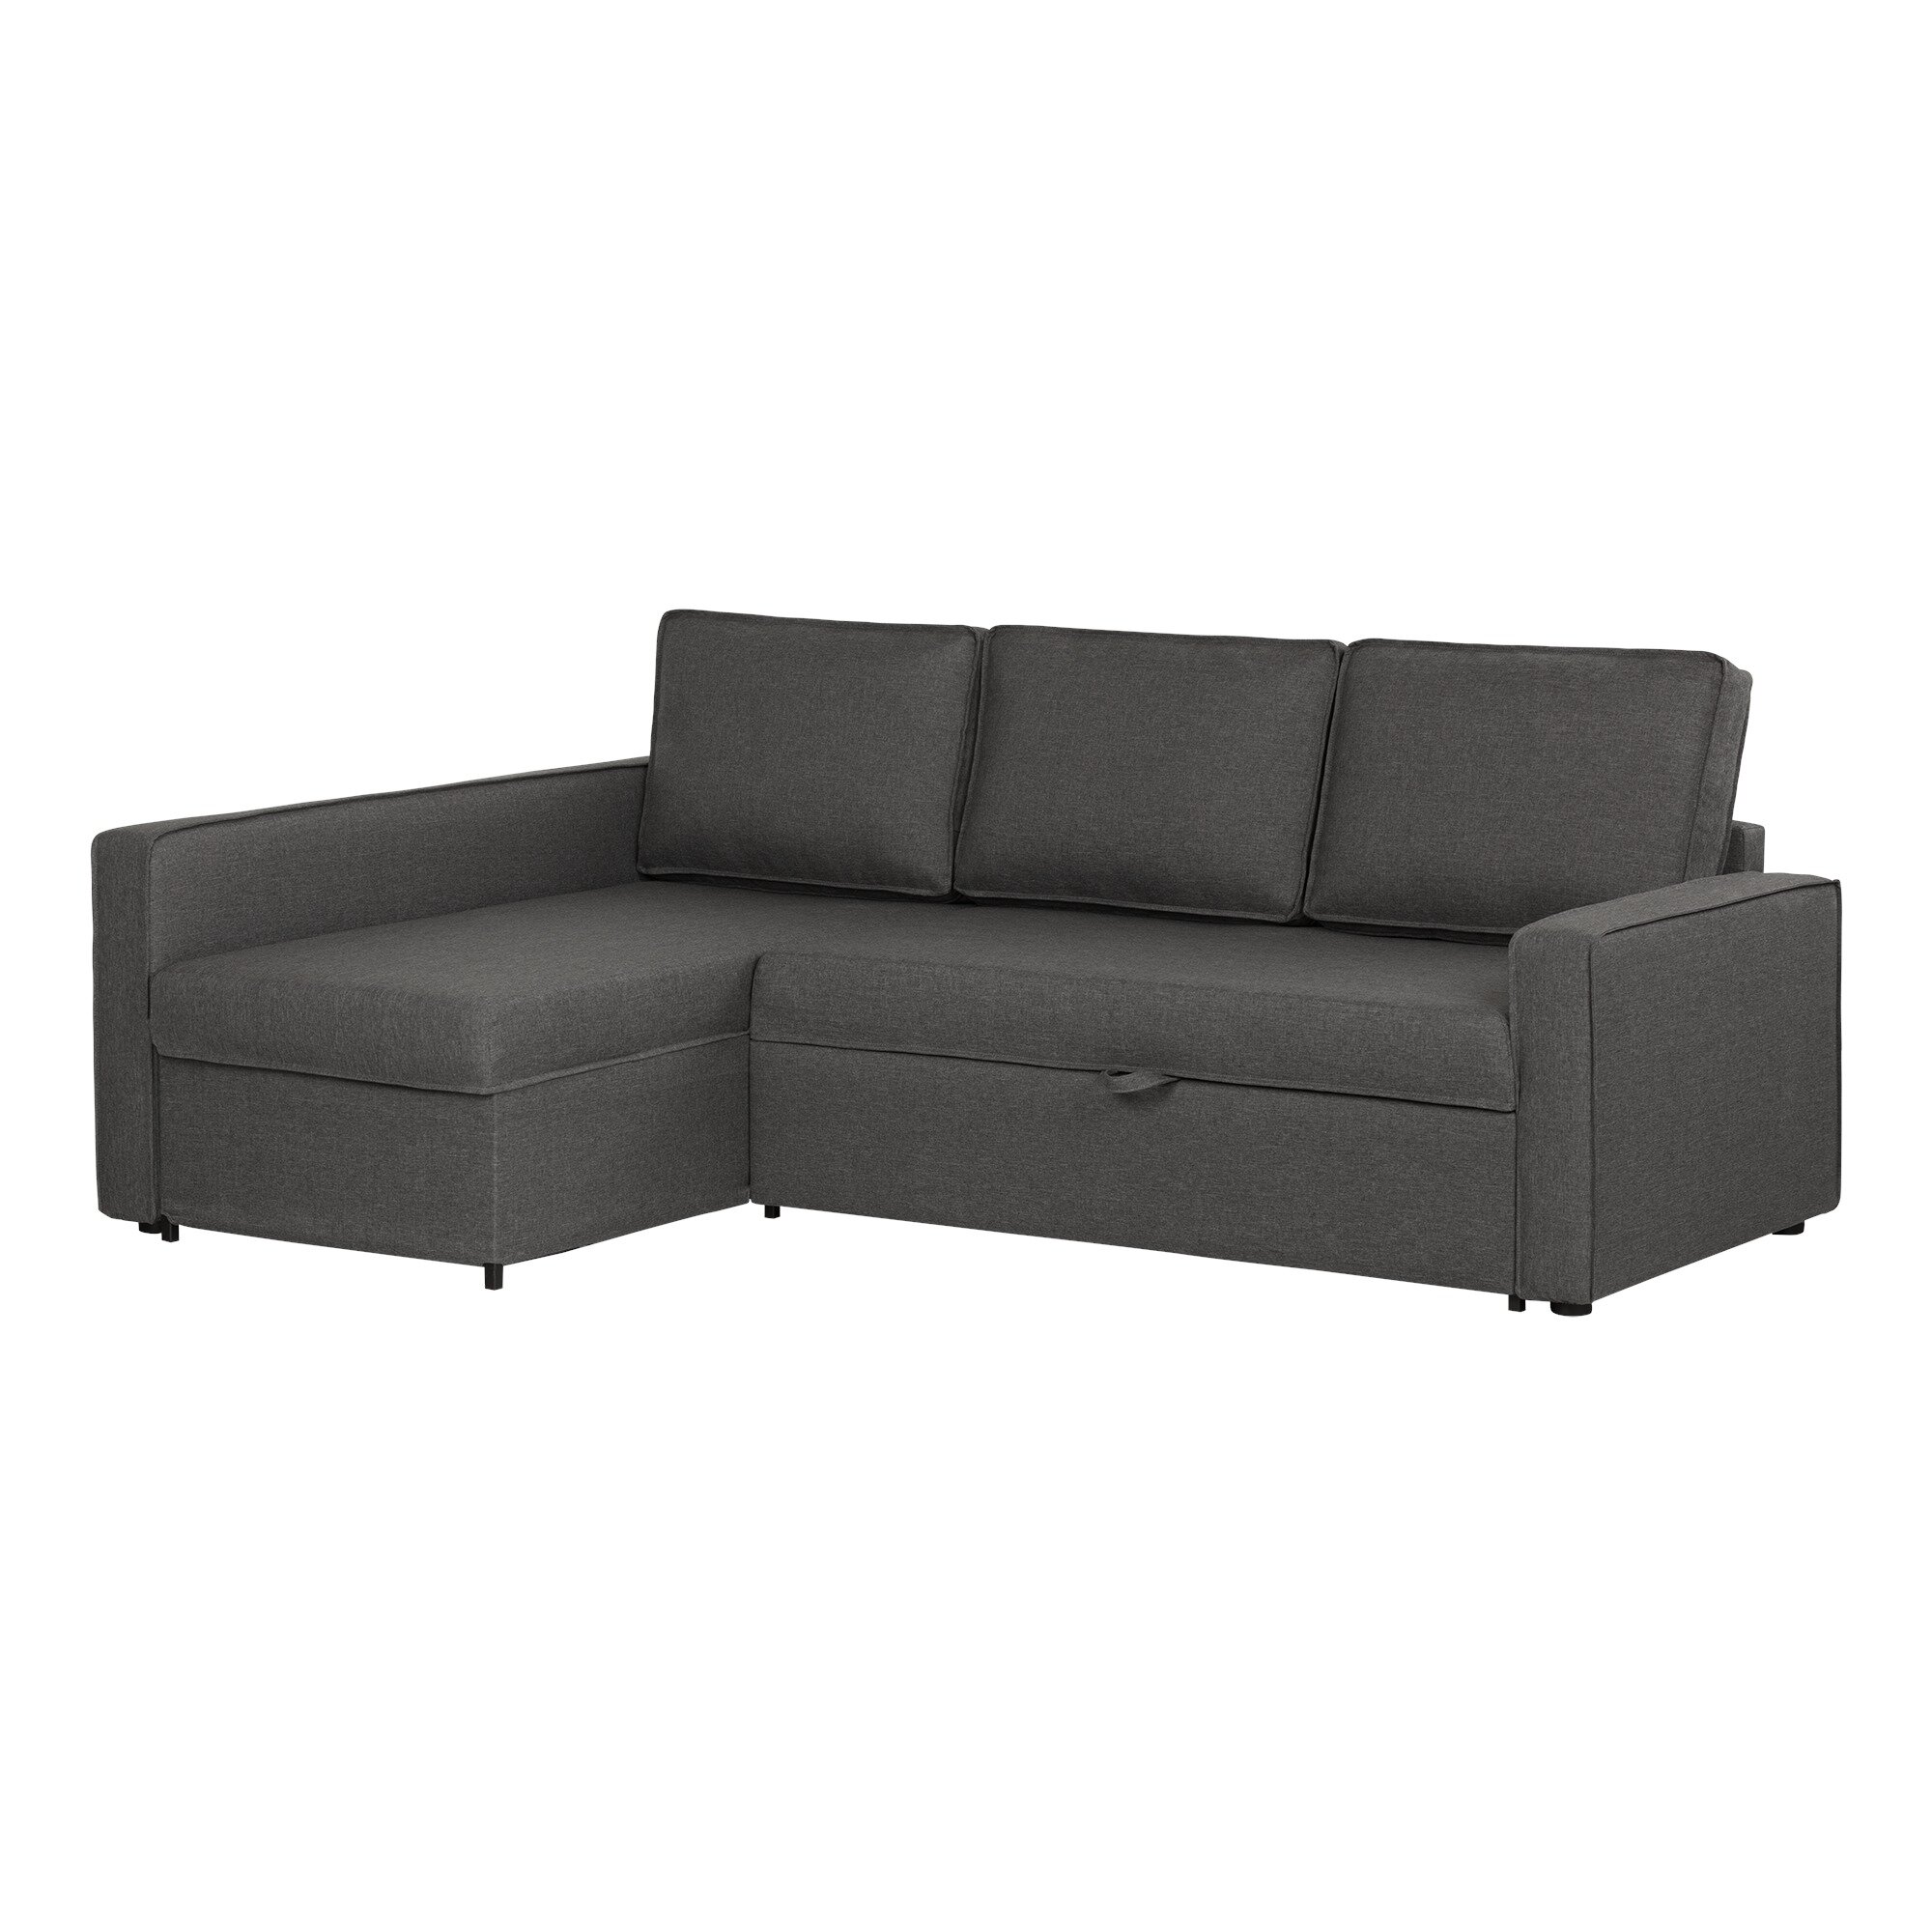 Live-it Cozy 87.8″ Wide Reversible Sleeper Sofa & Chaise